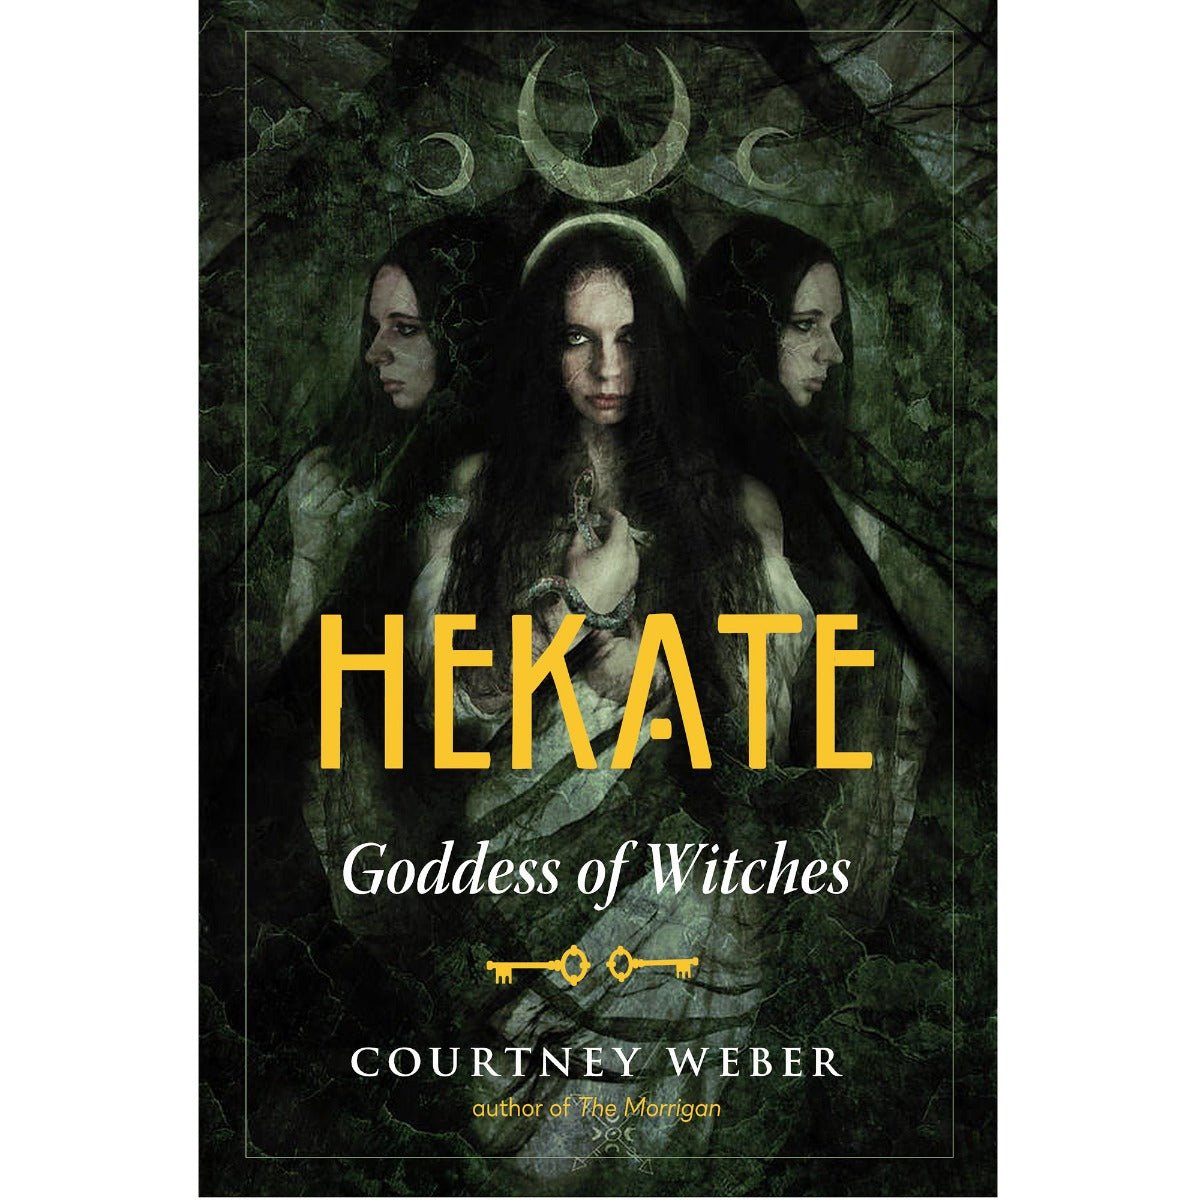 Hekate: Goddess of Witches - 13 Moons